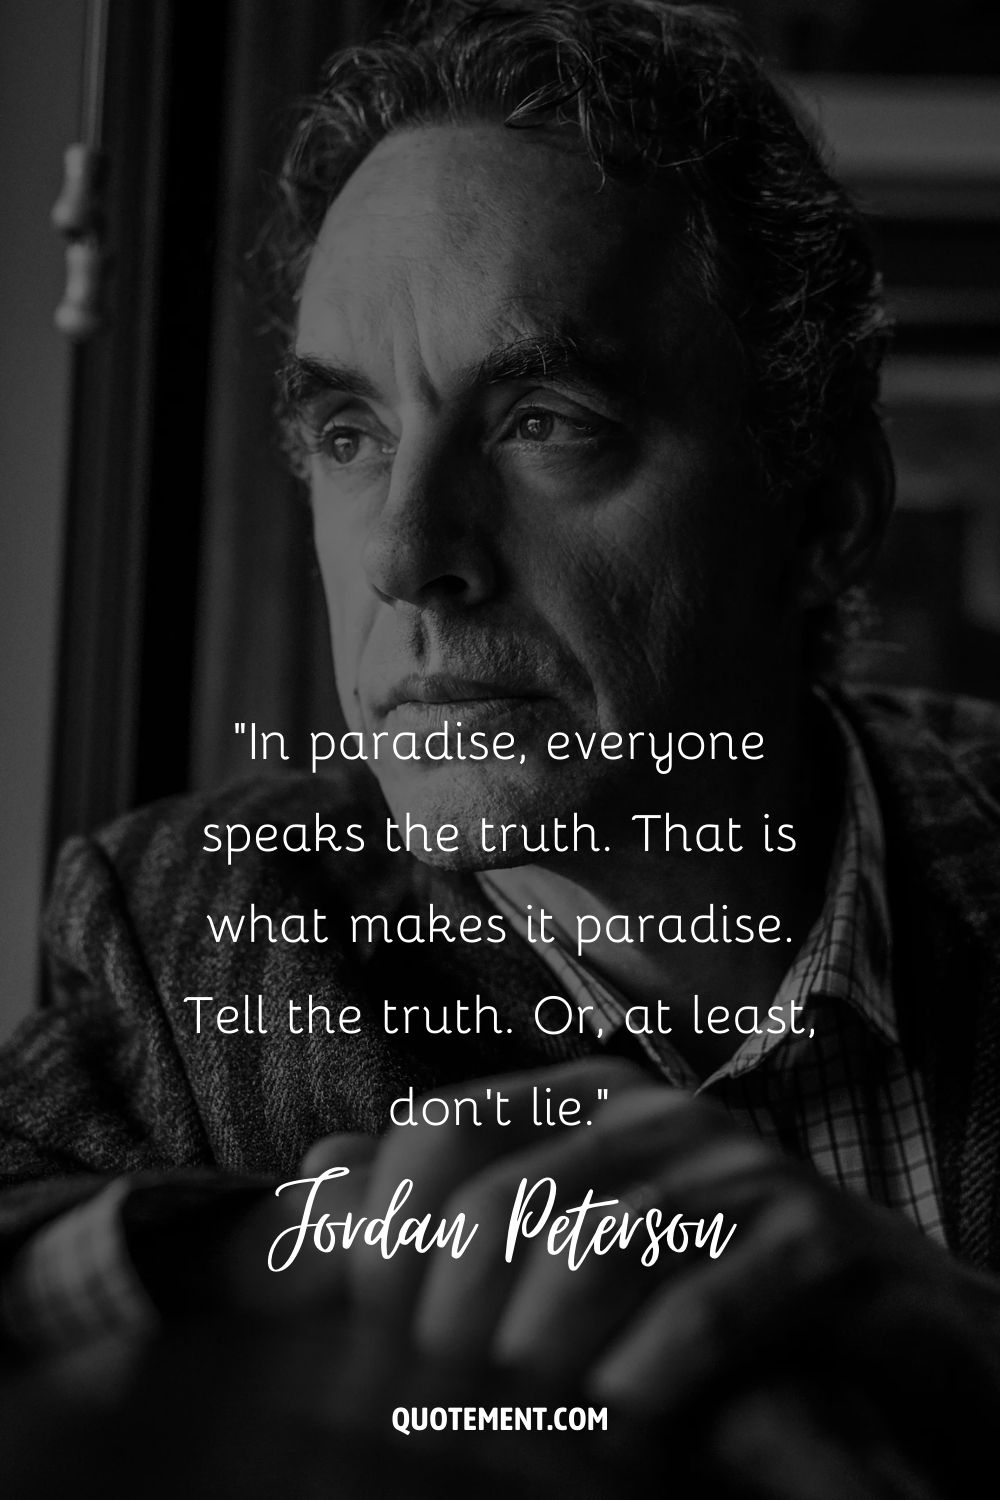 In paradise, everyone speaks the truth. That is what makes it paradise. Tell the truth. Or, at least, don’t lie